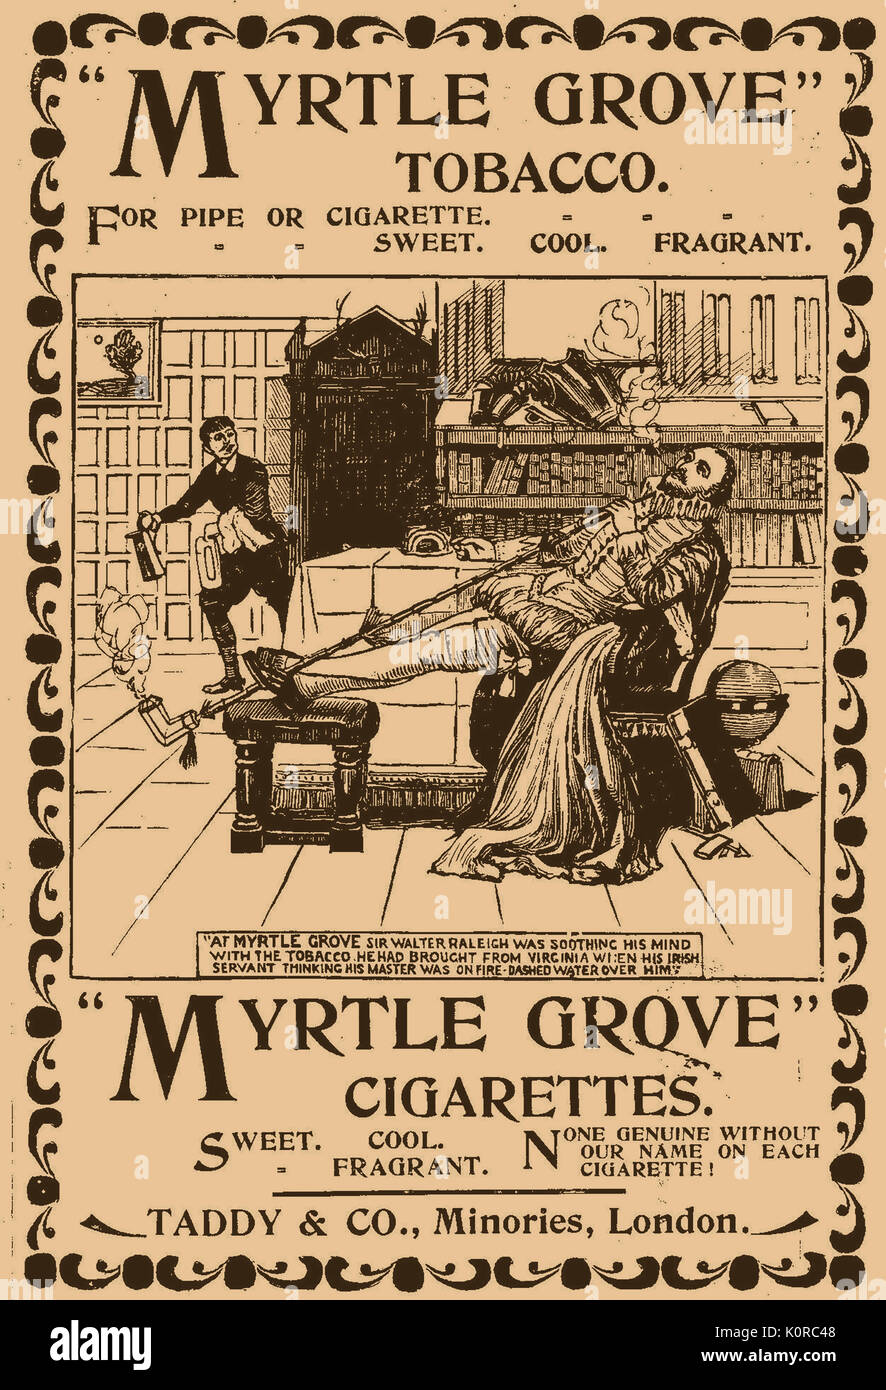 A Victorian (1896) advertisement for Myrtle Grove tobacco & cigarettes, featuring Sir Walter Raleigh smoking an extra long pipe and servant bringing water to put out the fire Stock Photo